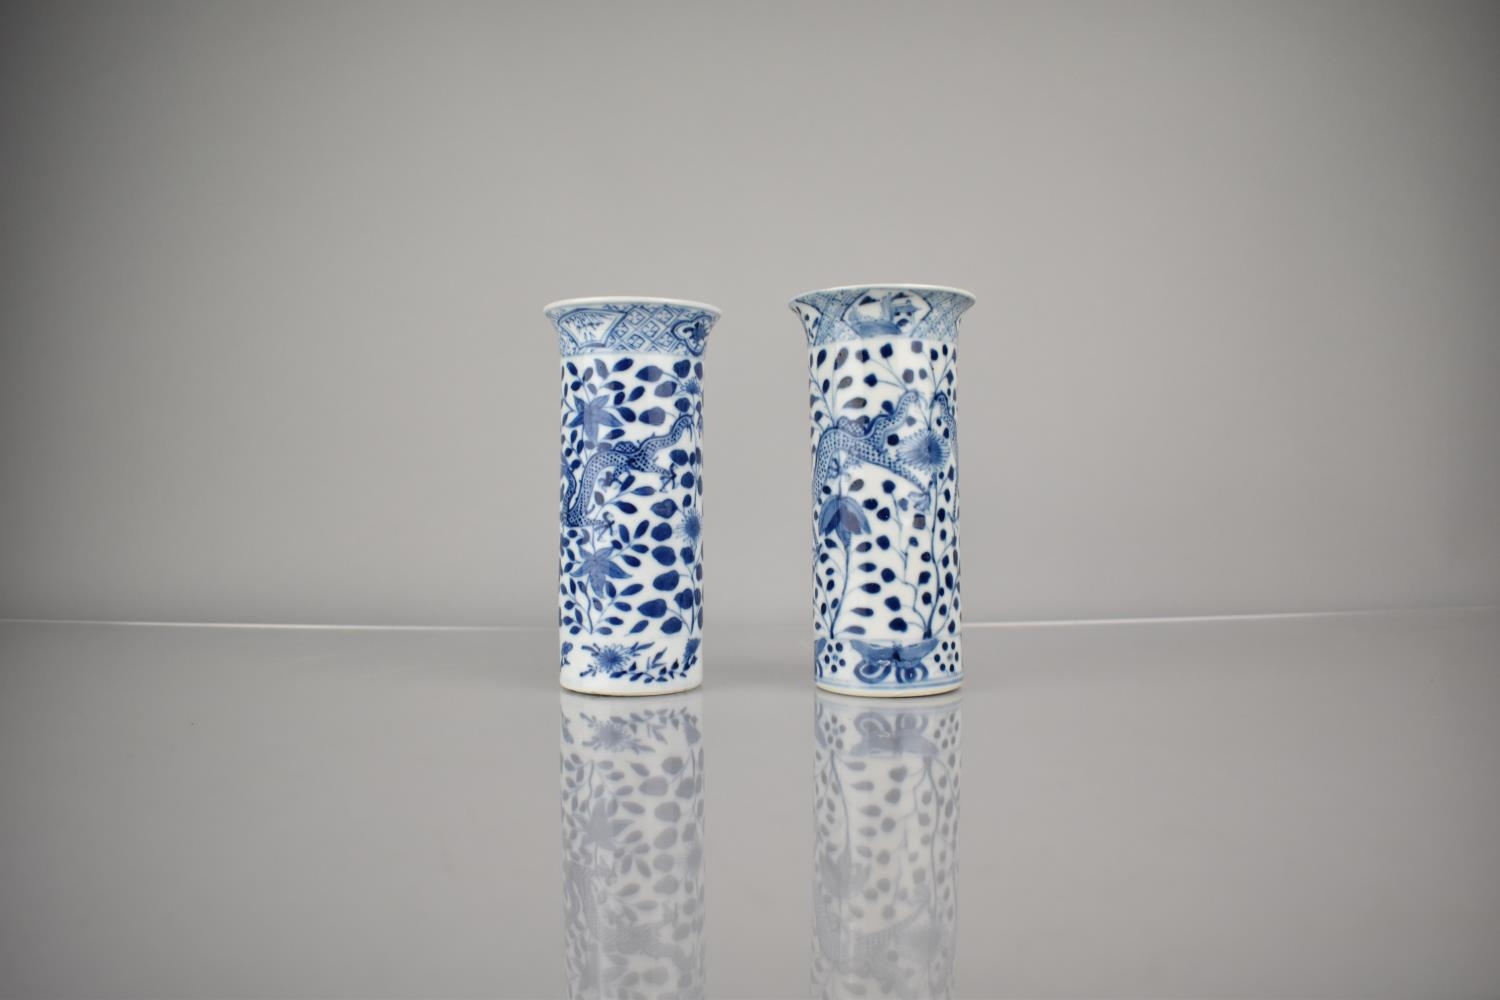 A Near Pair of 19th/20th Century Chinese Porcelain Sleeve Vases Decorated with Dragons Amongst - Image 4 of 5